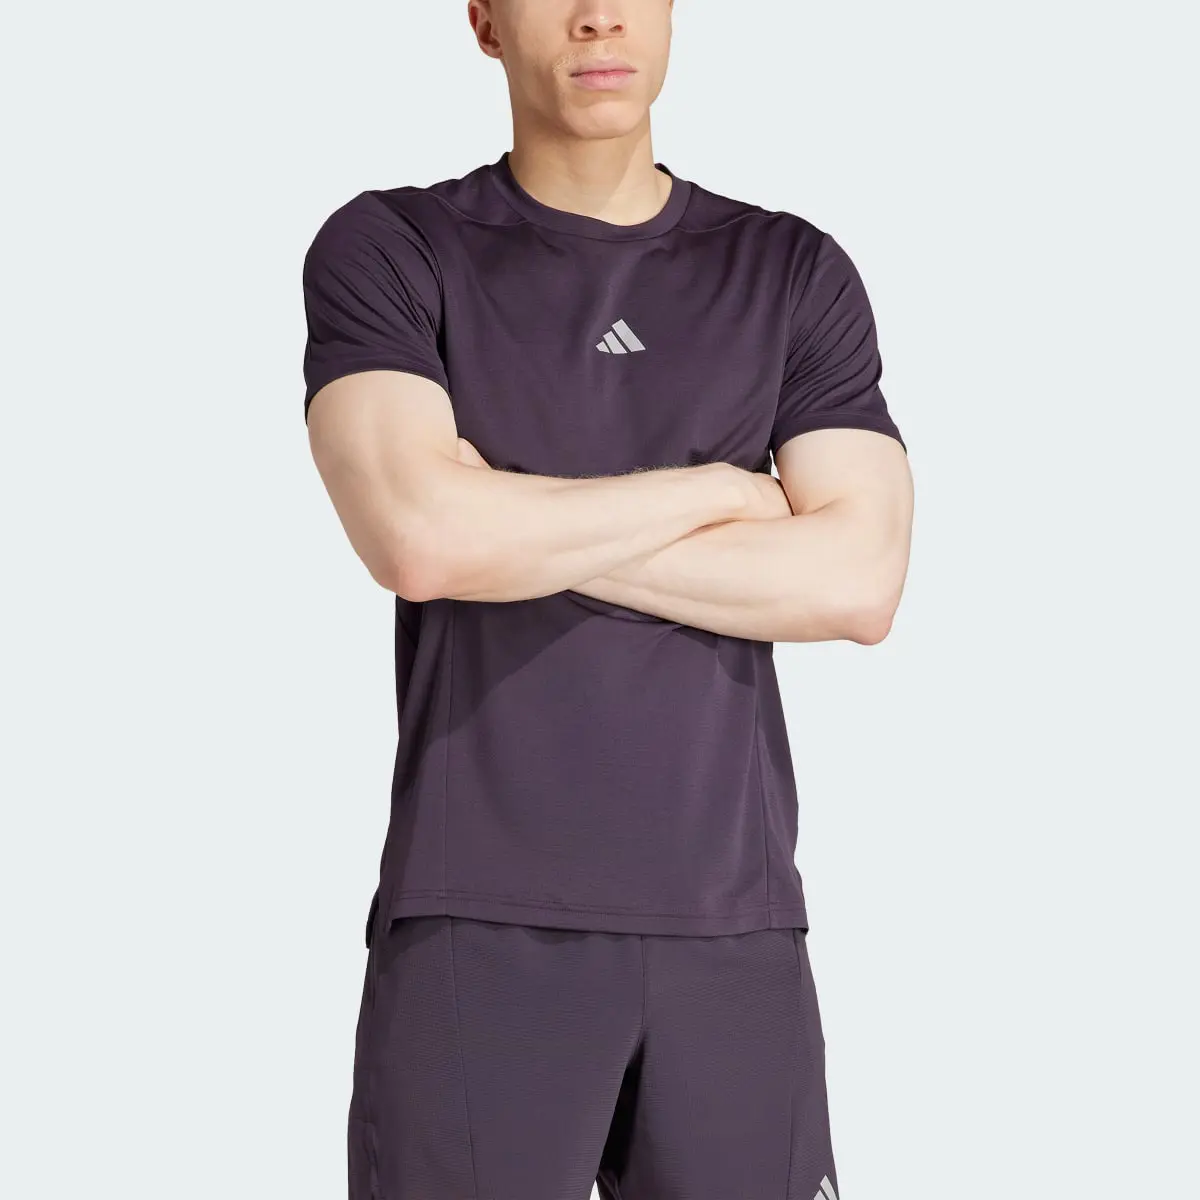 Adidas Designed for Training HIIT Workout HEAT.RDY Tee. 1